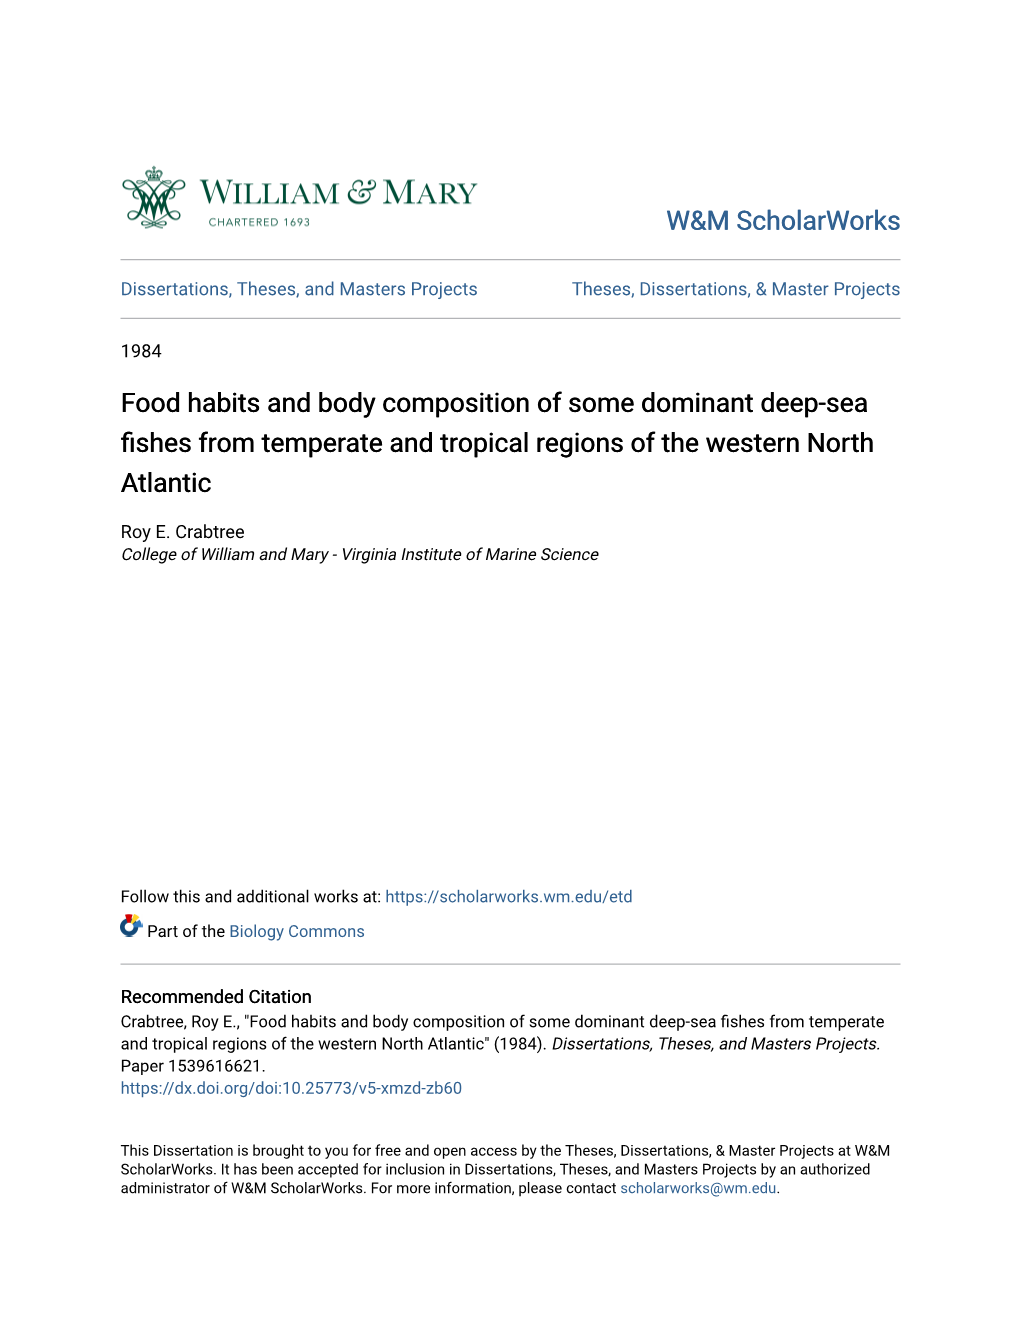 Food Habits and Body Composition of Some Dominant Deep-Sea Fishes from Temperate and Tropical Regions of the Western North Atlantic